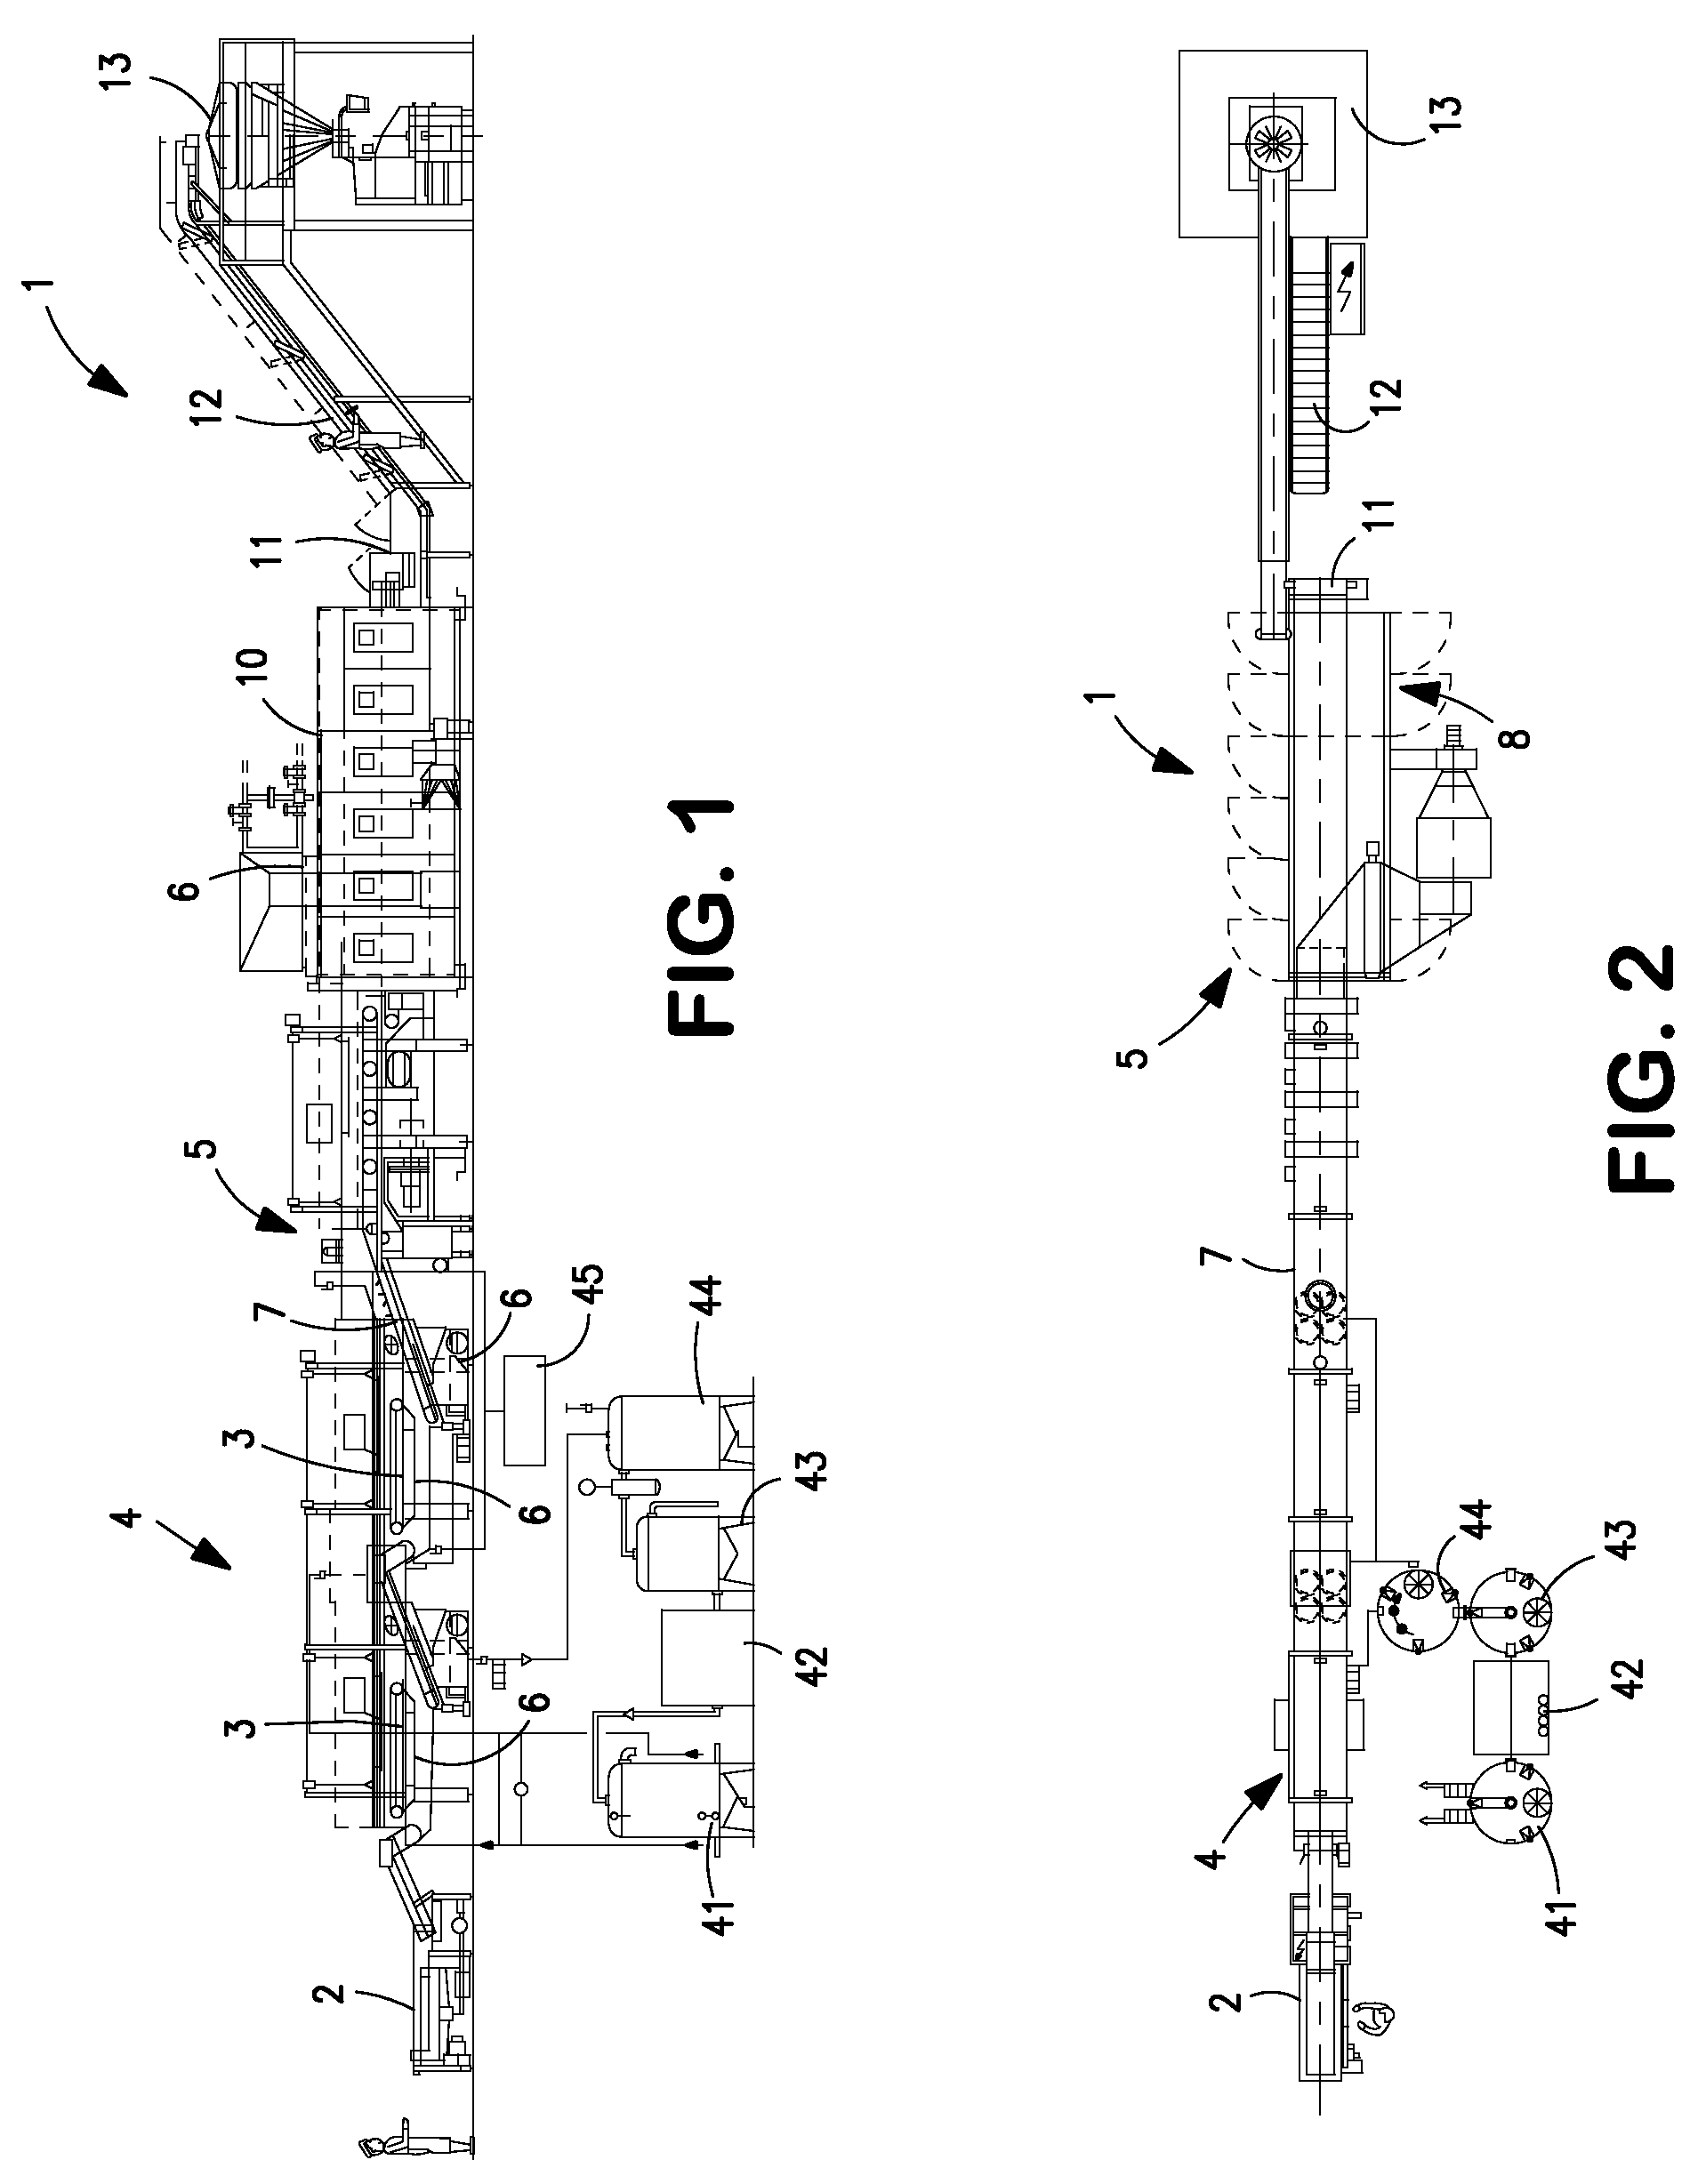 Process for washing and sterilizing food products, particularly vegetables, and relevant apparatus